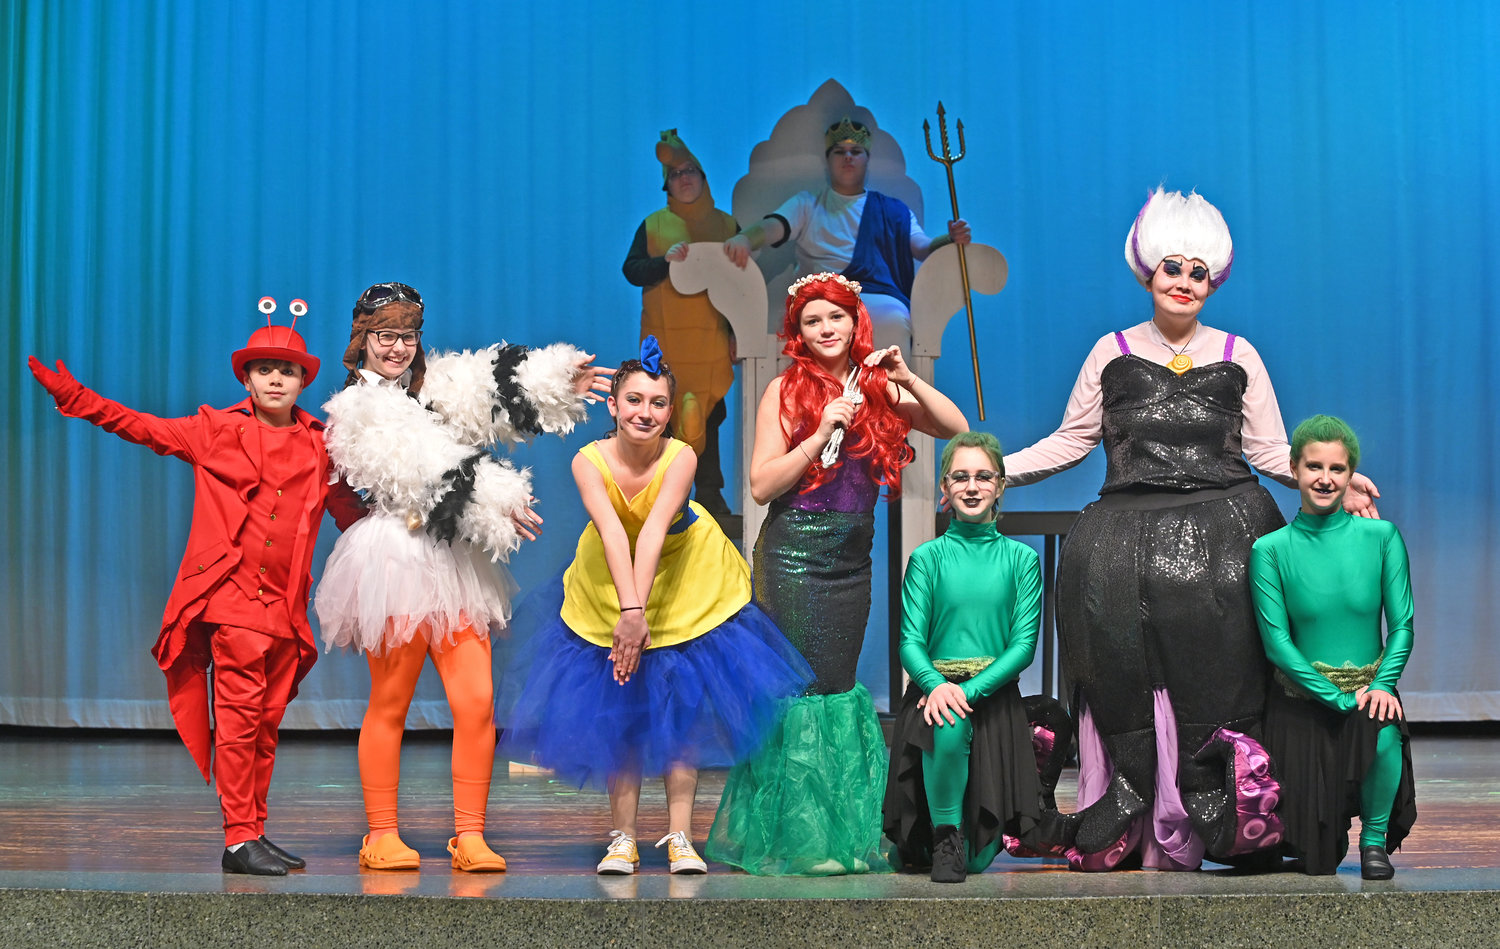 "Little Mermaid Jr." cast members, from left, Raymond Tucker as Sebastian, Alexis Rowe as Scuttle, Kasey Sorrell as Flounder, Charlize Price as Ariel, Lillian Conover as Jetsan, Kayedyn Secor as Ursula and Jocelyn Gannon as Flotsan pose Wednesday, Feb. 8 during dress rehearsal at Strough Middle School in Rome.